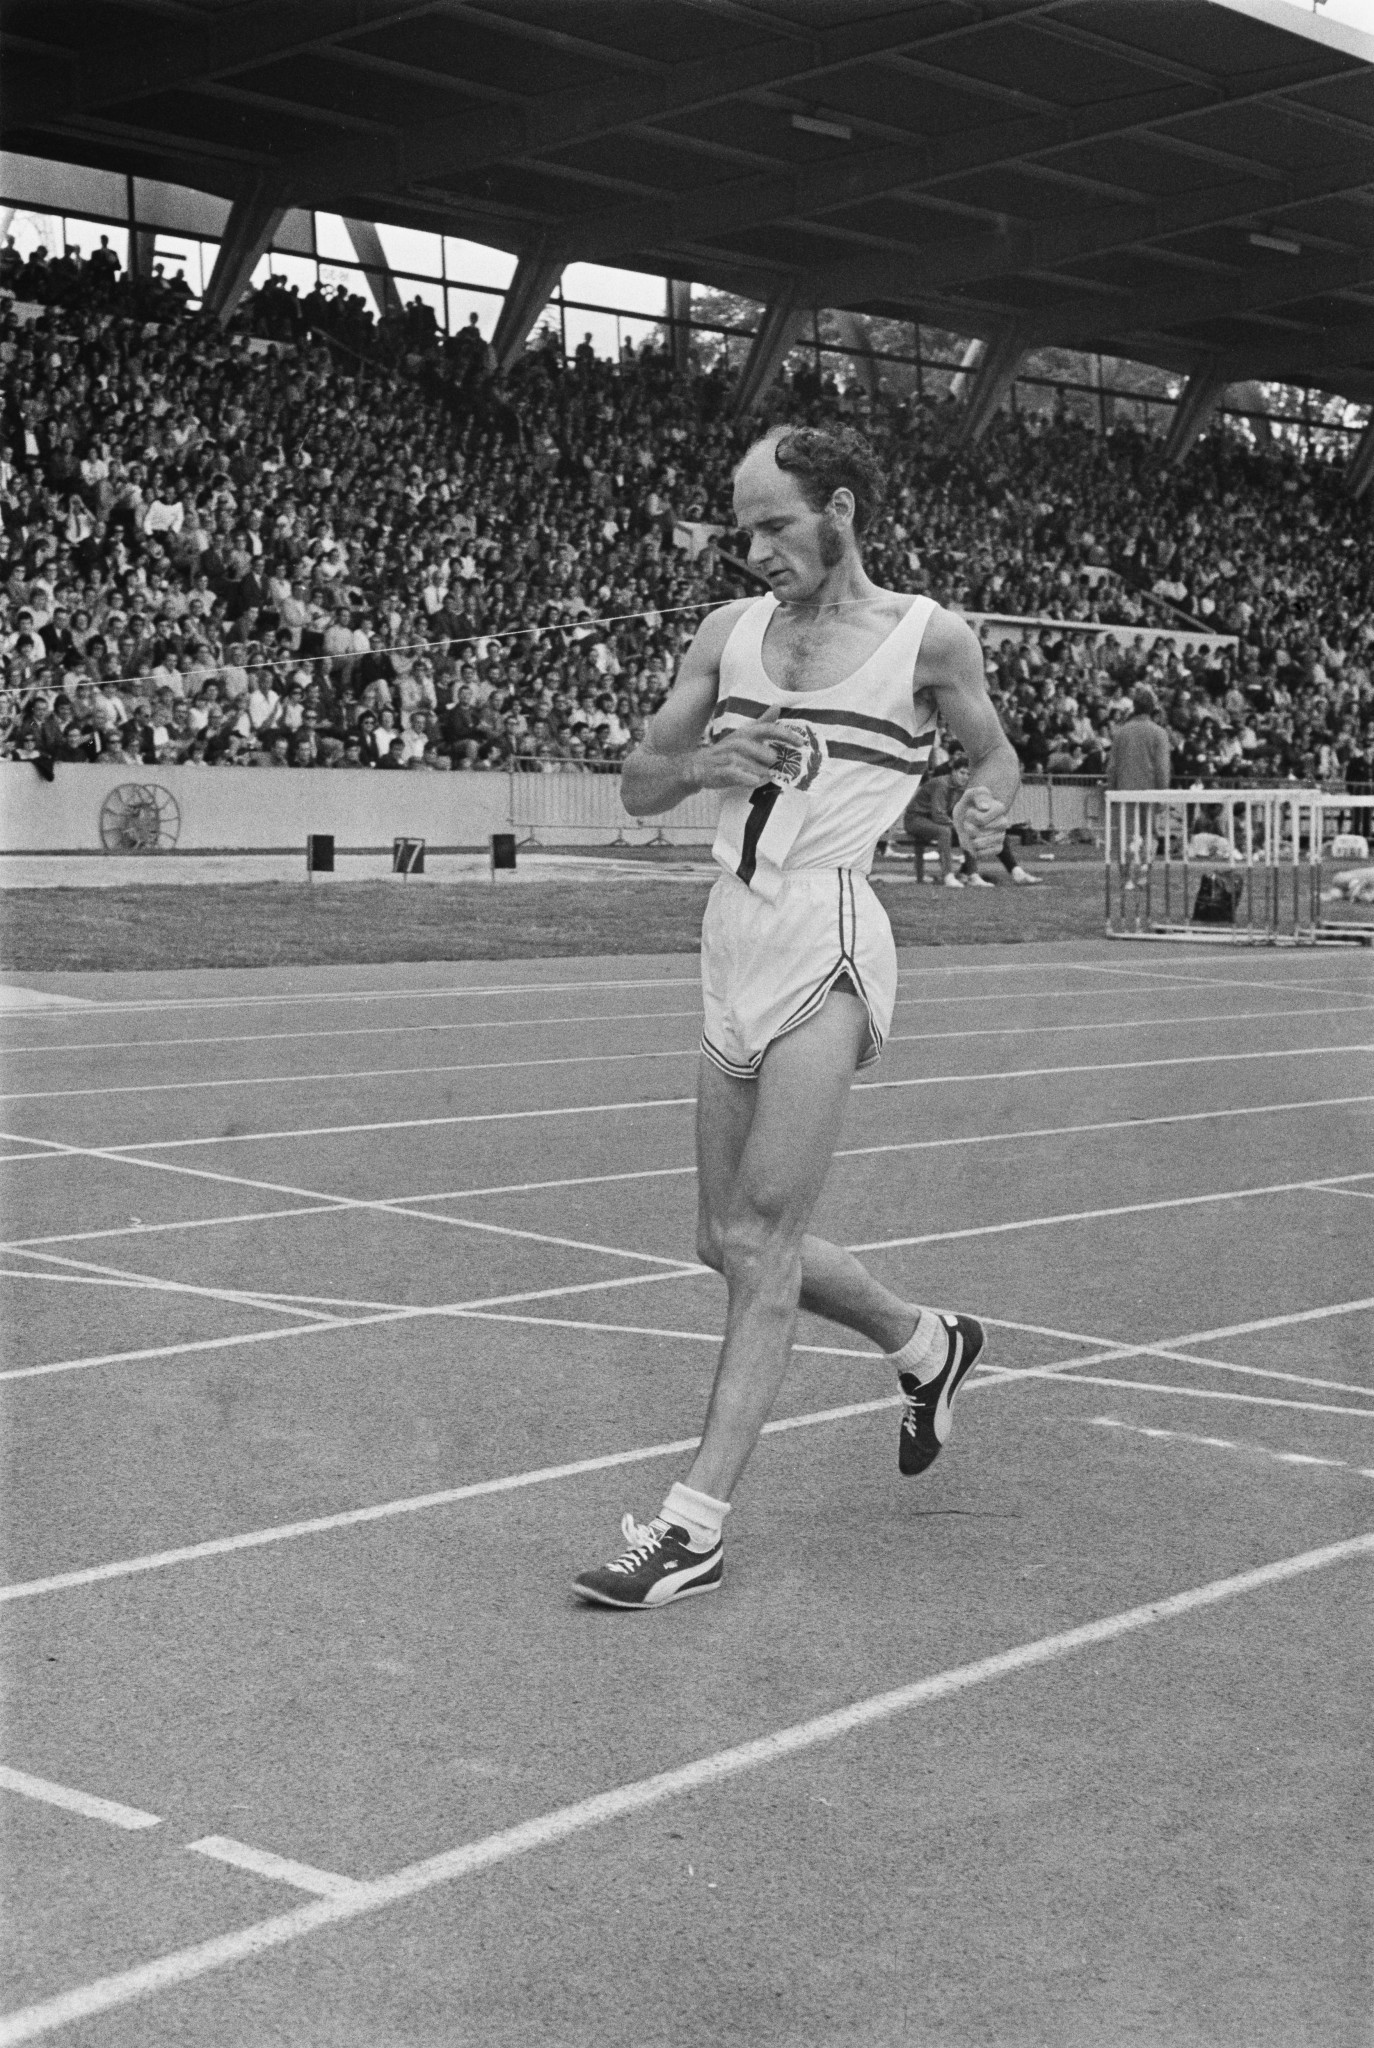 Paul Nilhill has died at 81 due to COVID-19 ©England Athletics